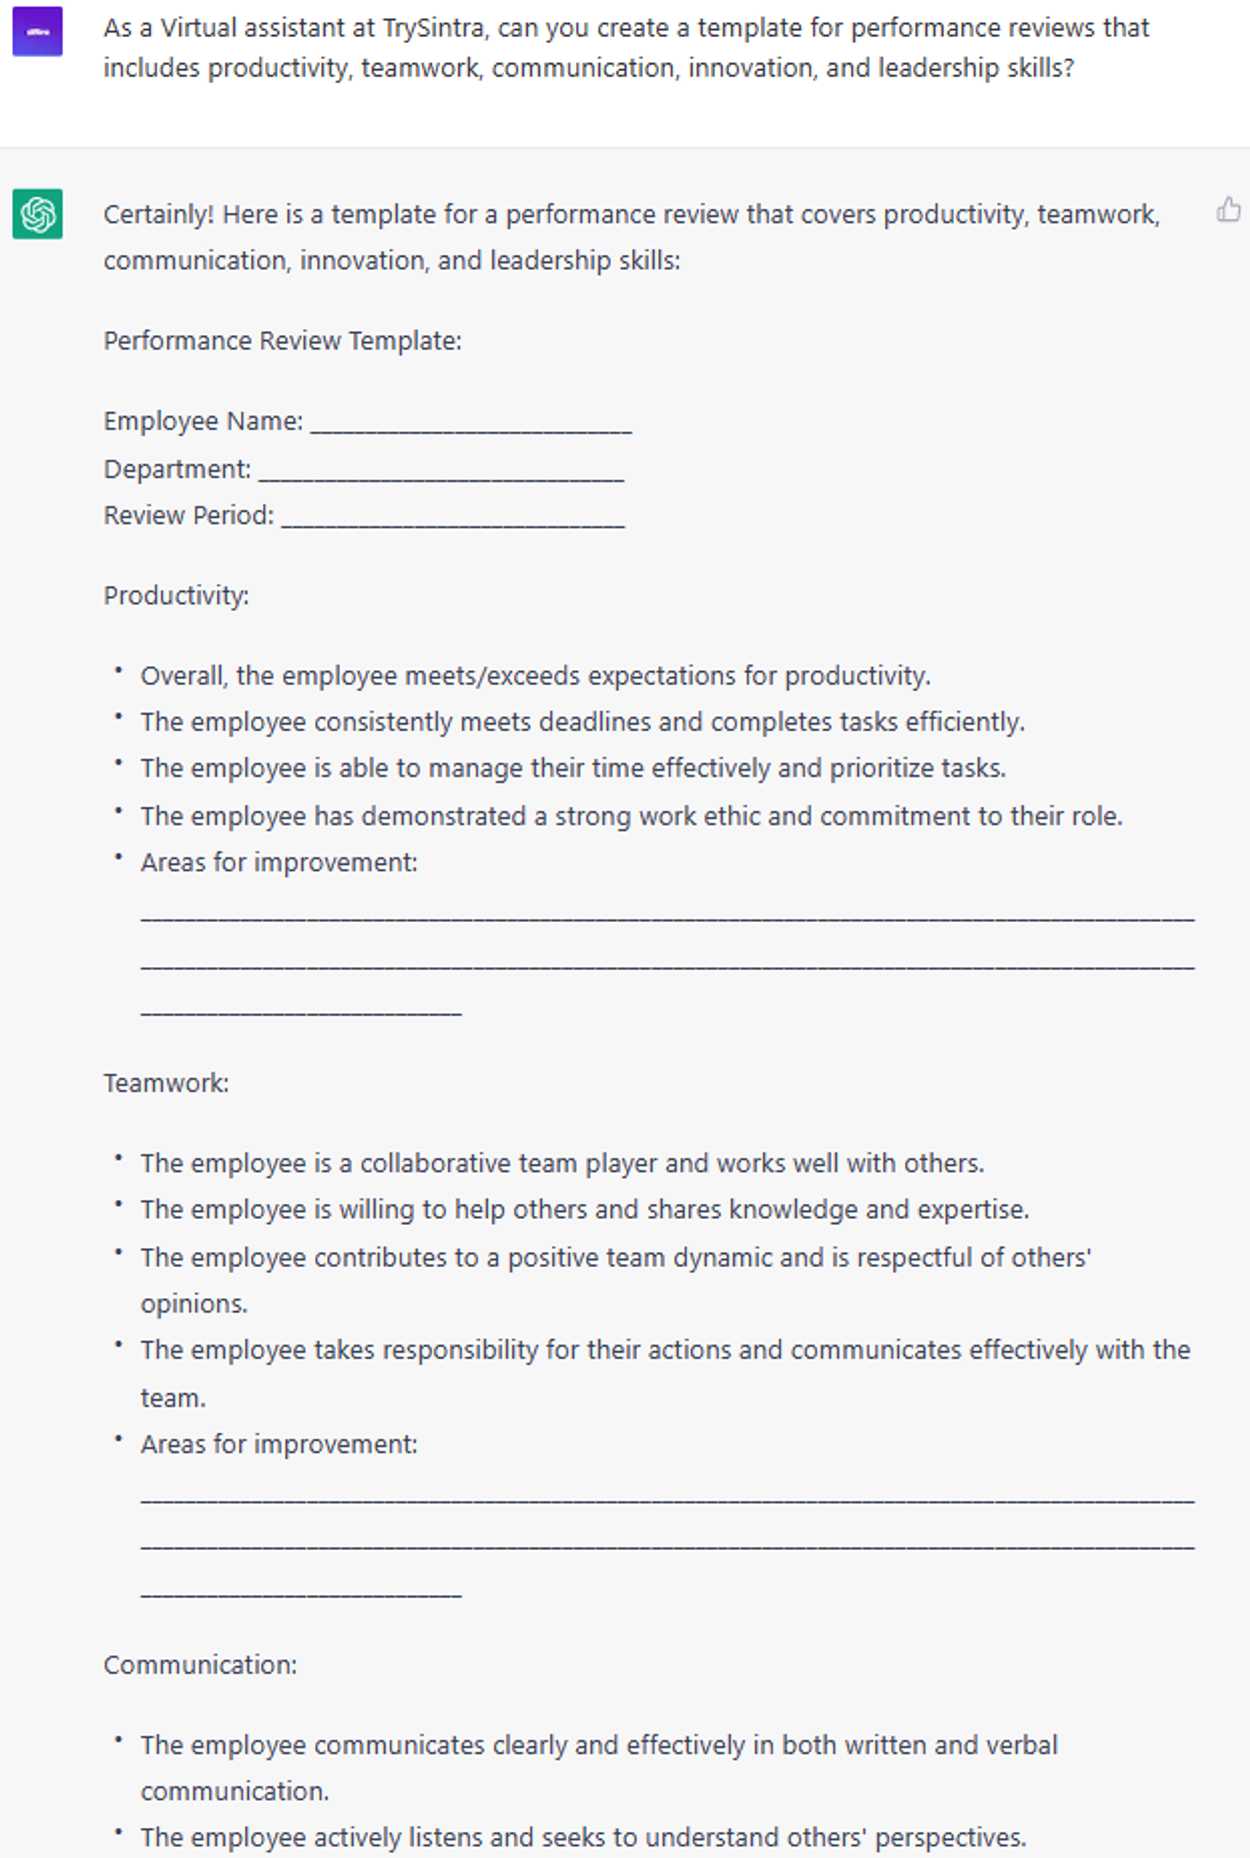  6 Expert ChatGPT Prompts: Generating performance review templates